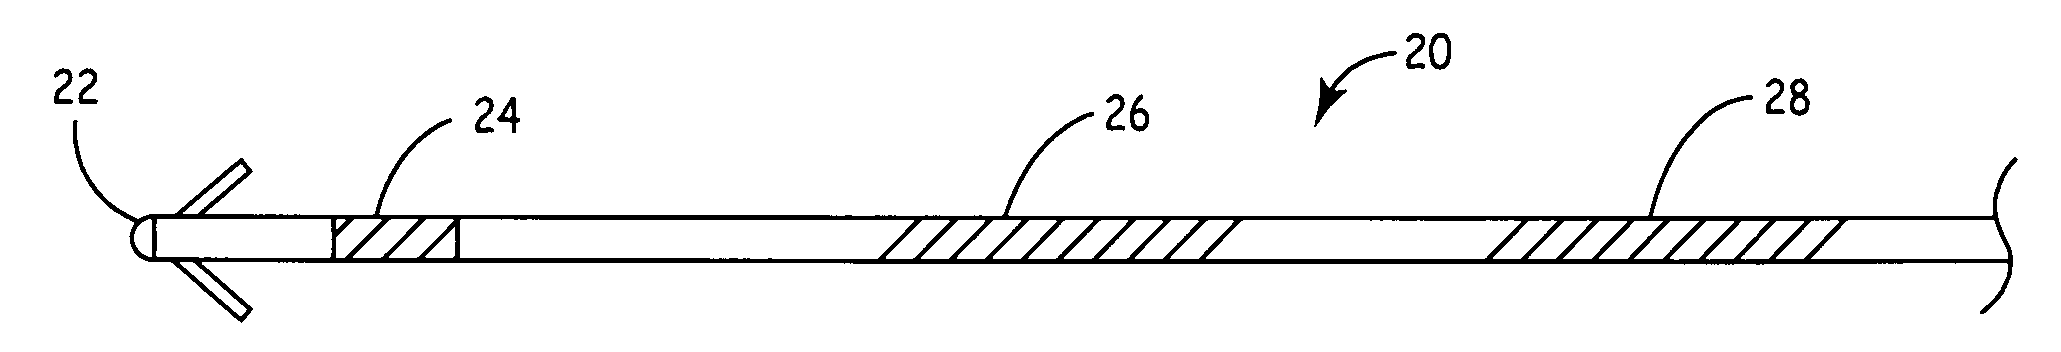 Medical devices incorporating carbon nanotube material and methods of fabricating same